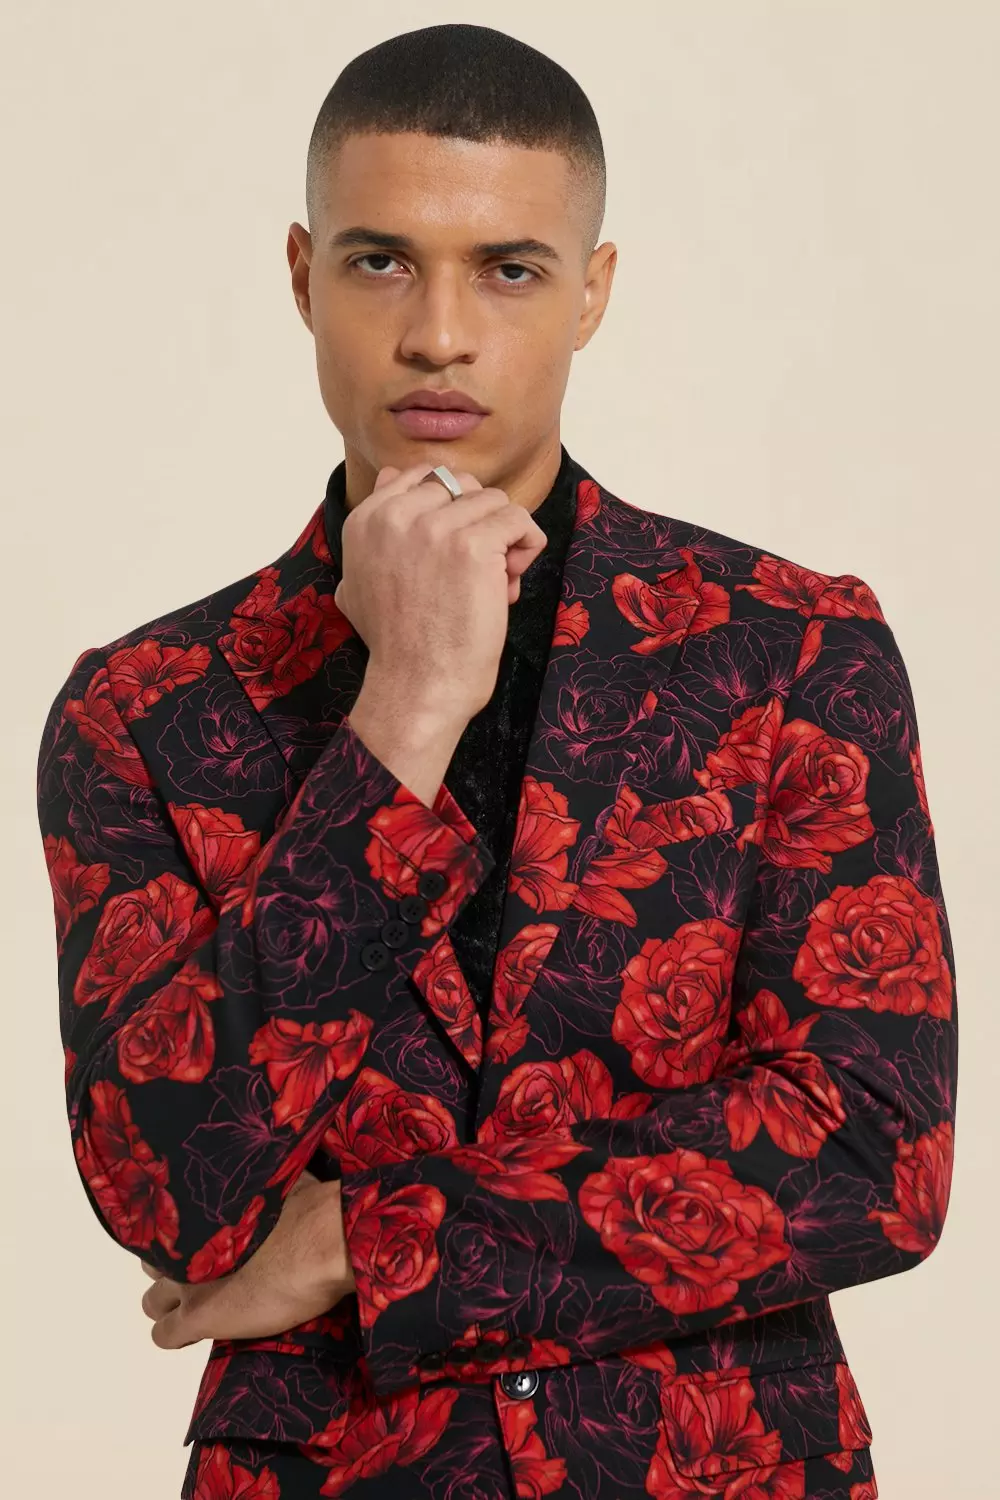 boohooMAN Relaxed Fit Spliced Floral Print Suit Jacket - Black - Size 38